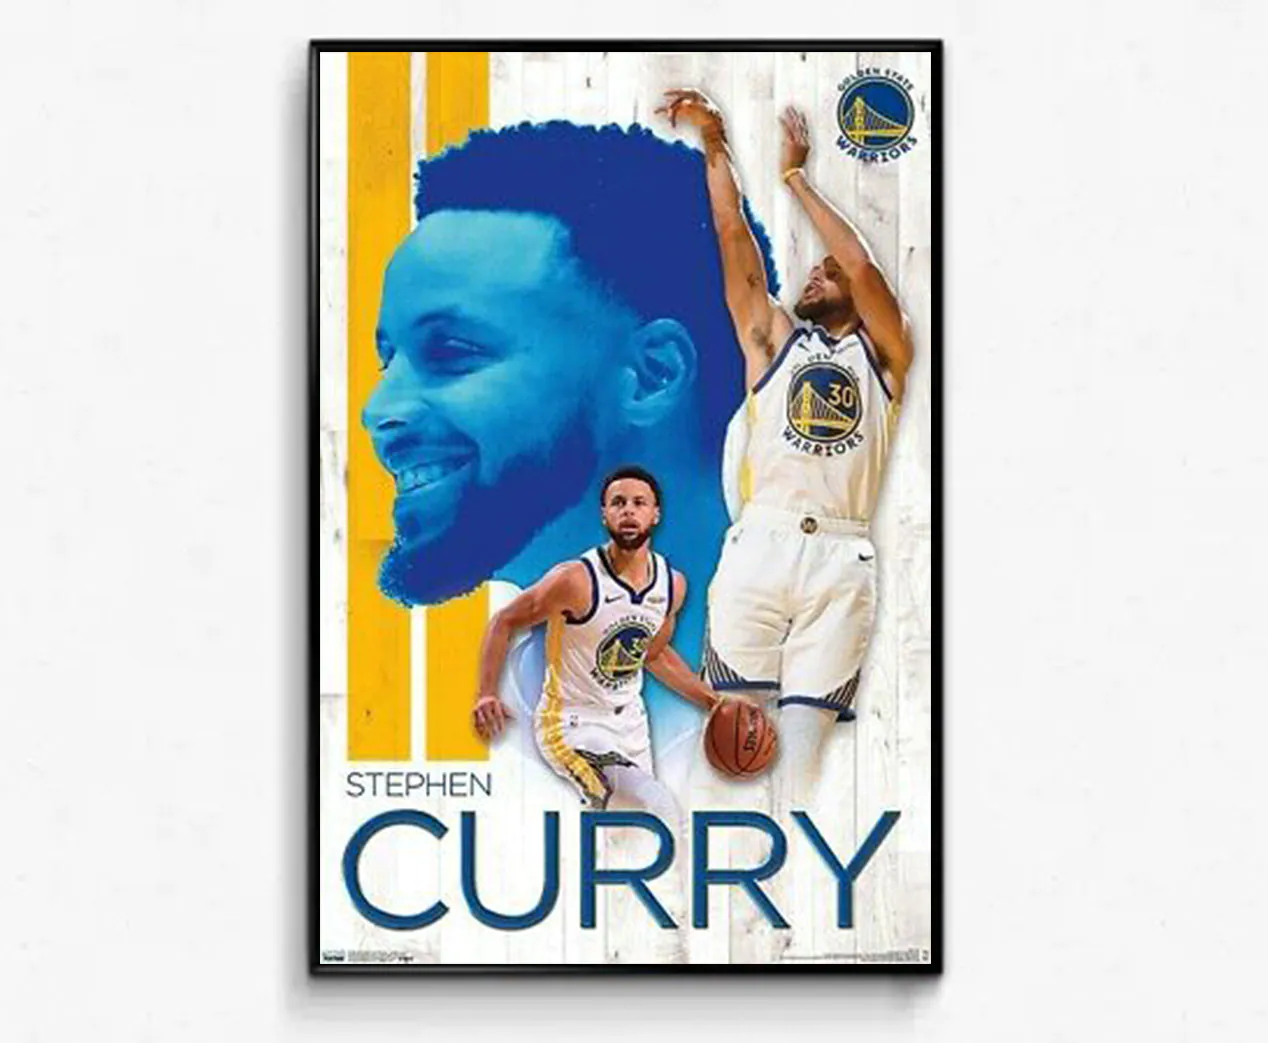 Steph Curry - Golden State Warriors Poster